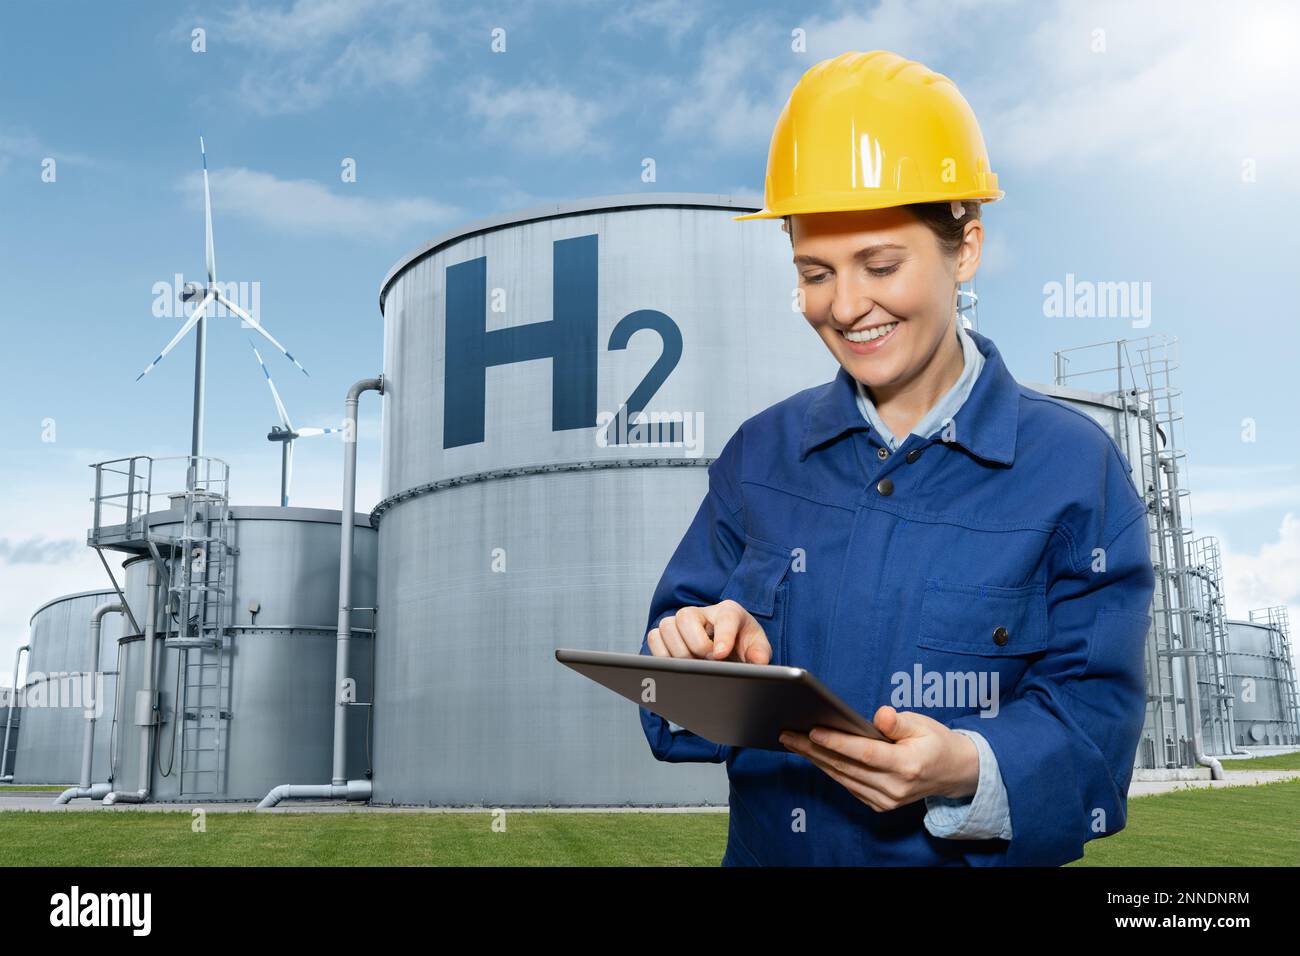 Engineer in helmet on a background of Hydrogen factory Stock Photo